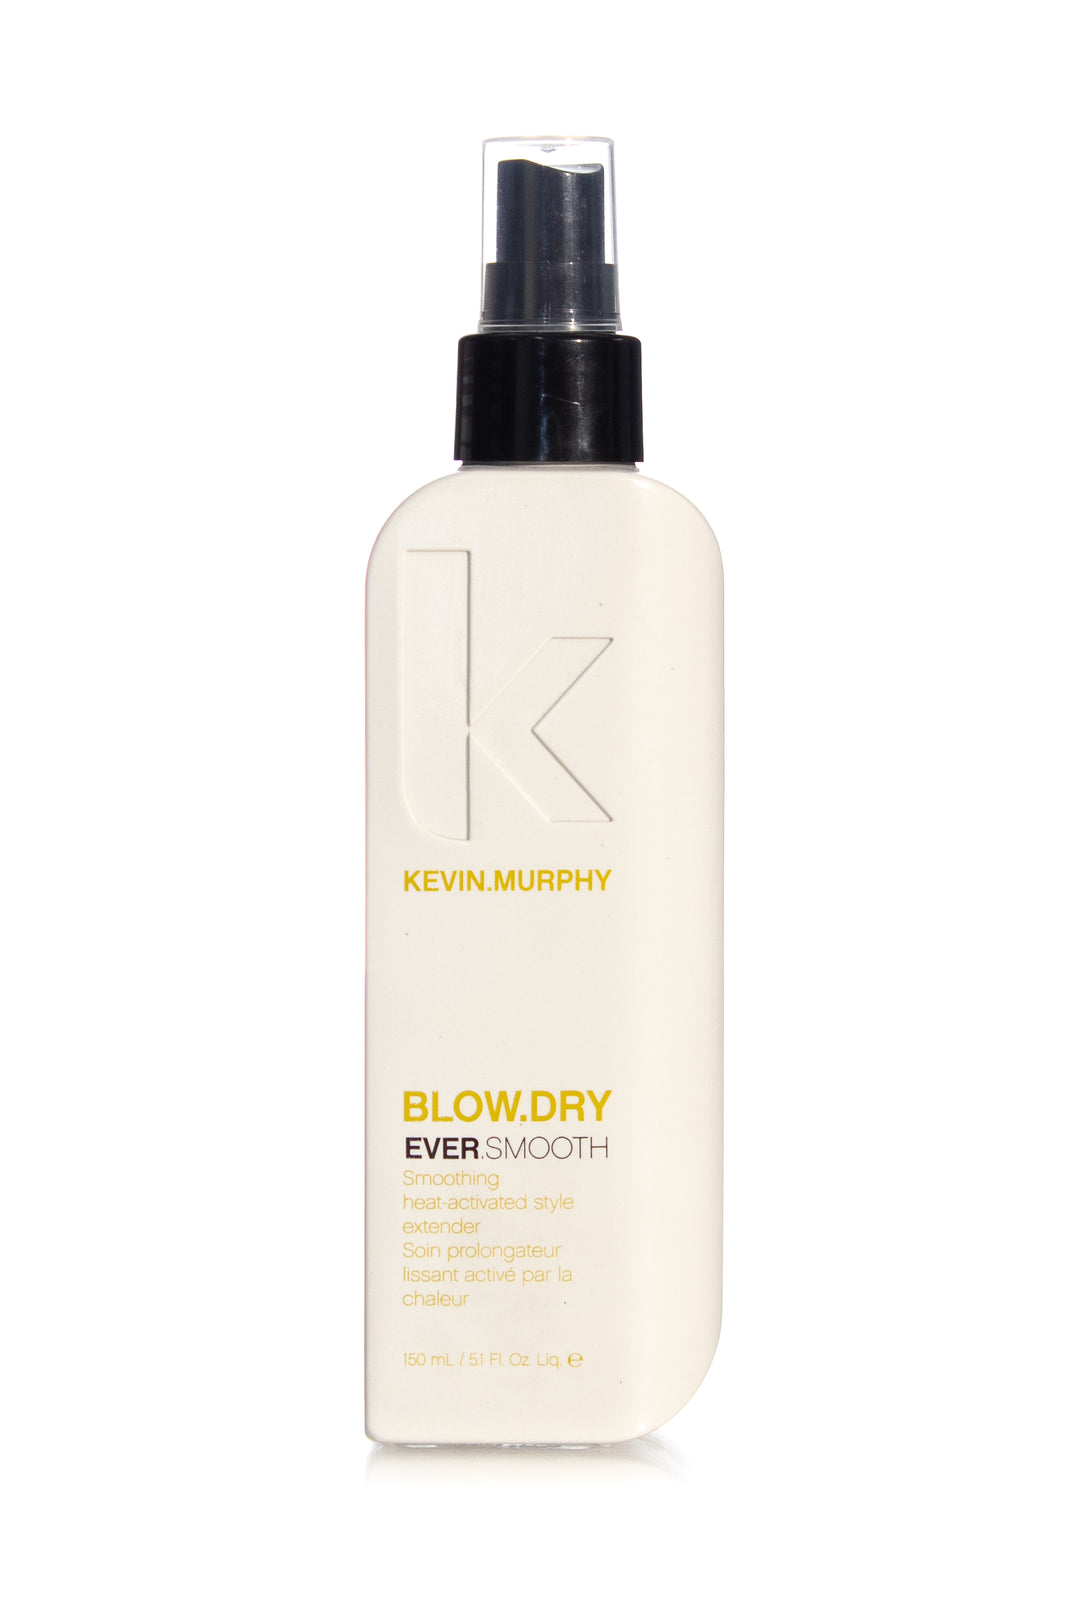 KEVIN MURPHY Blow Dry Ever Smooth | 150ml